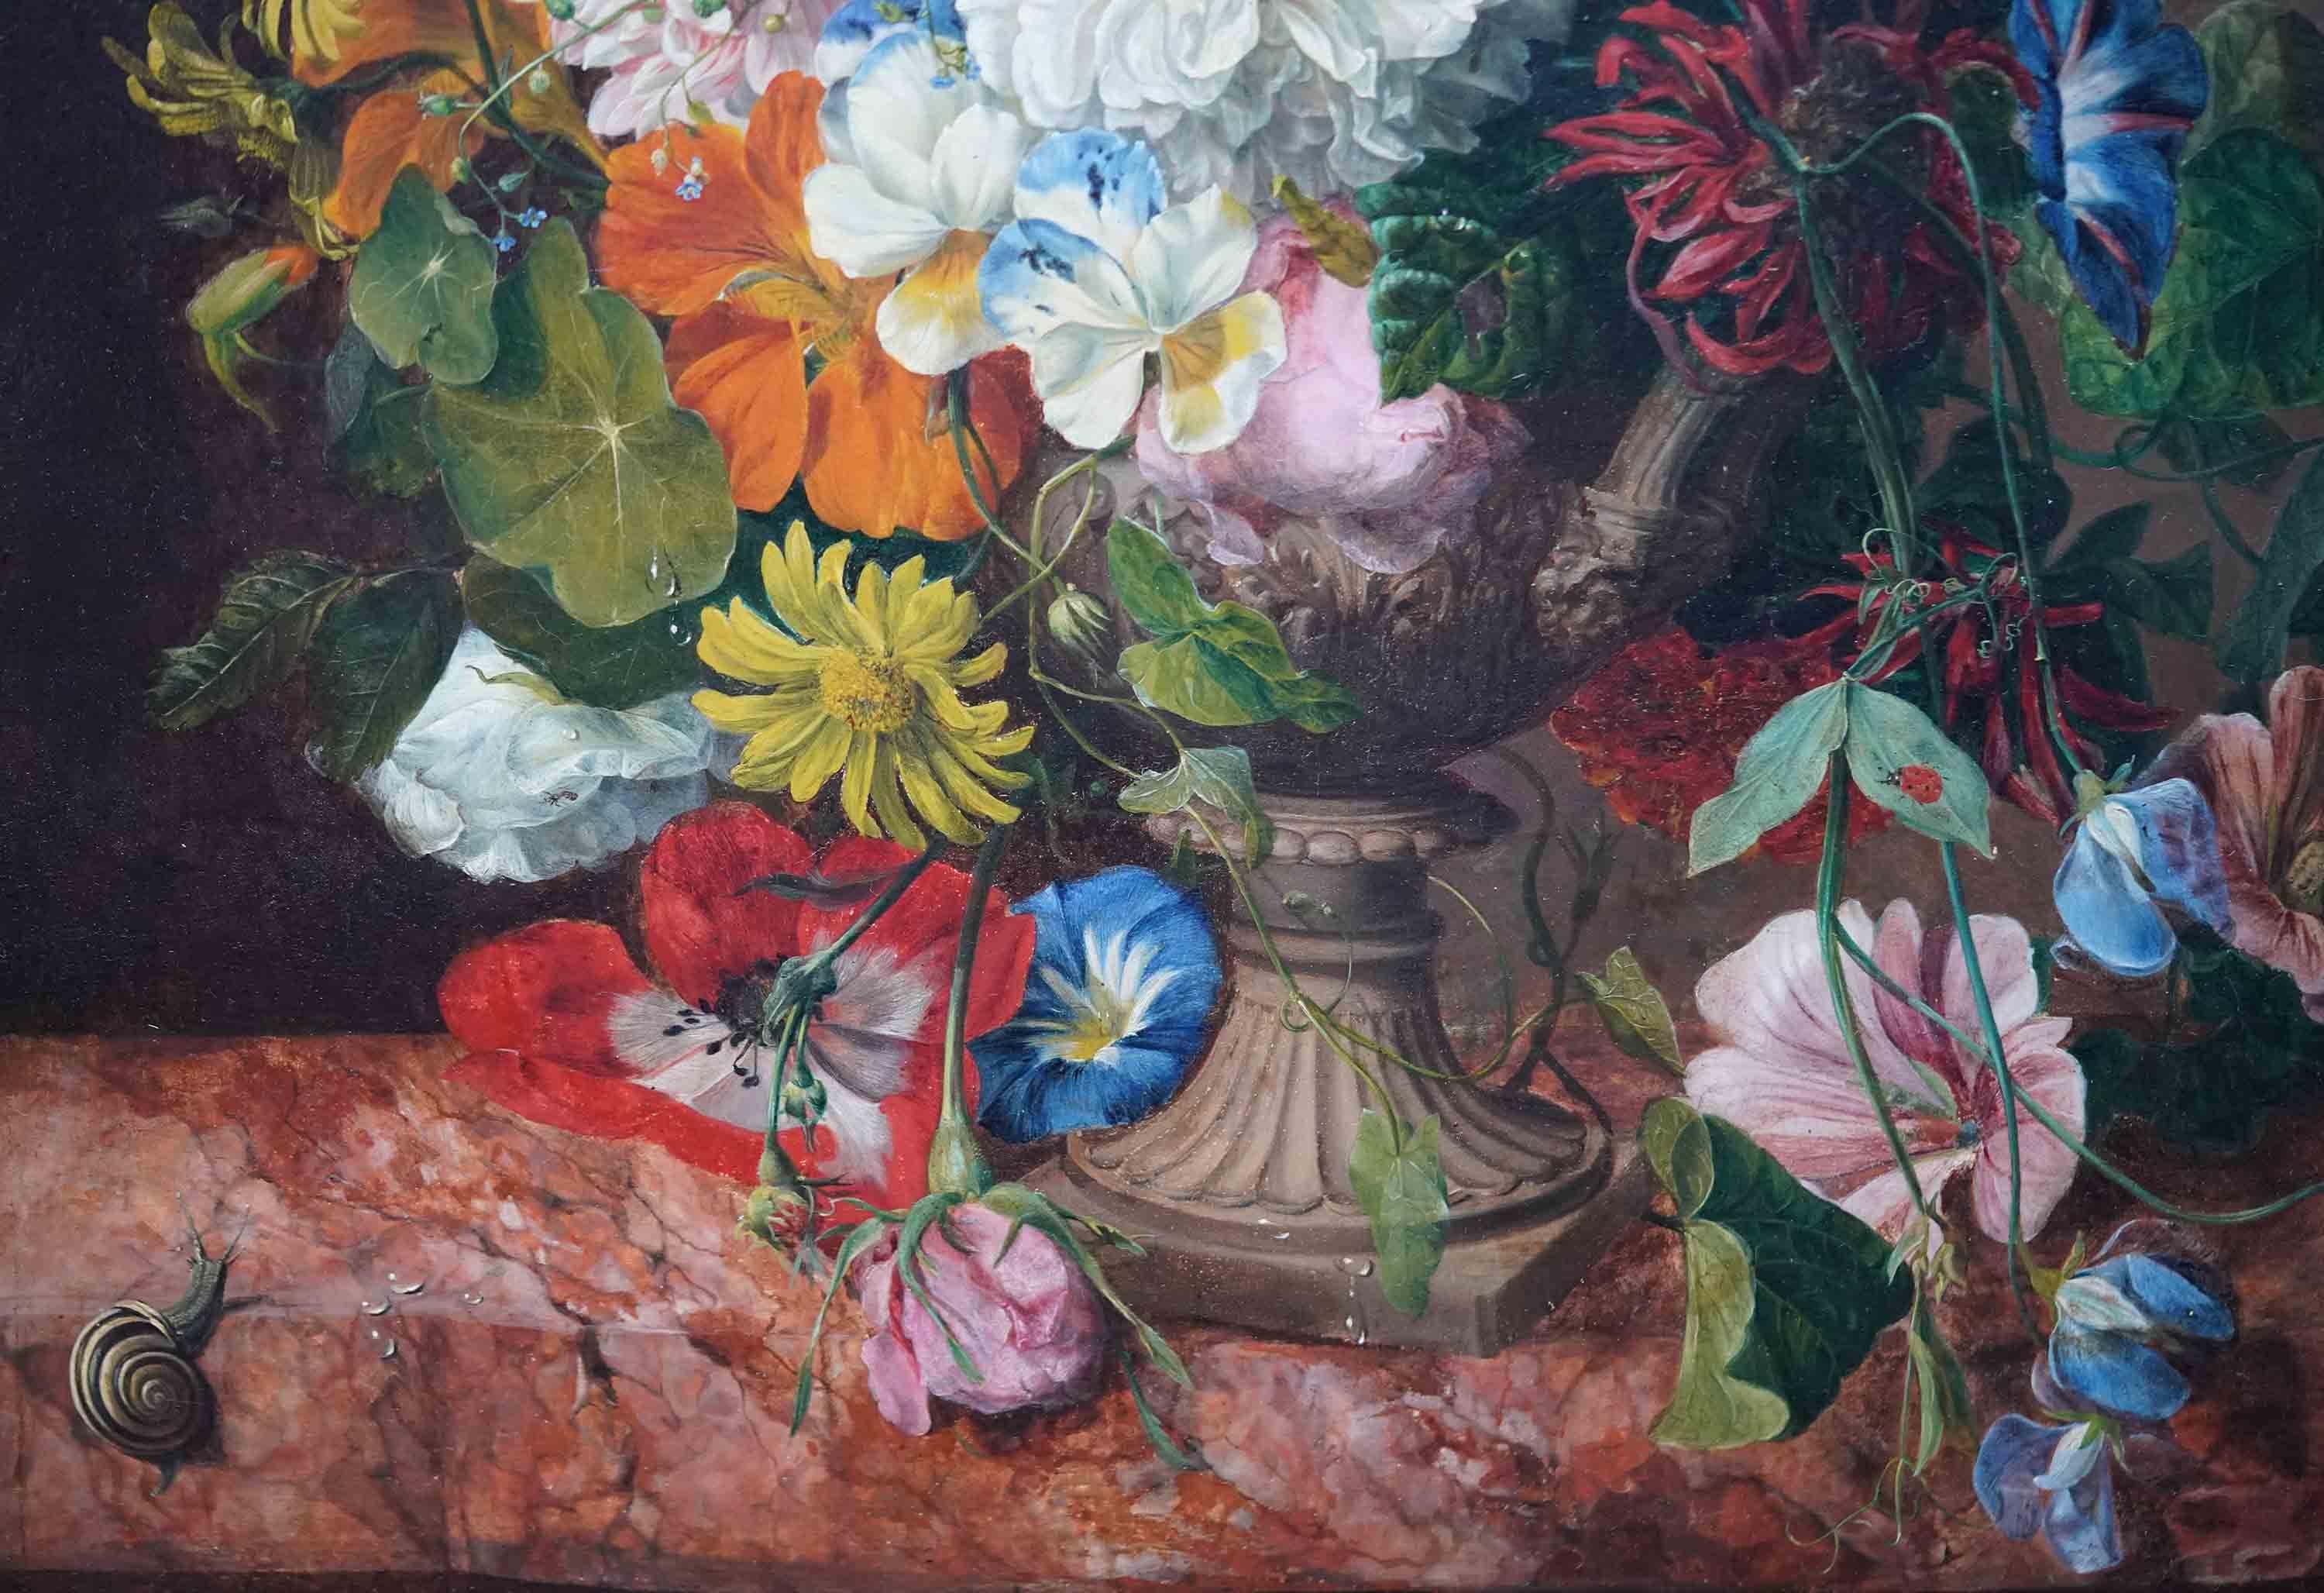 This stunning 19th century still life floral oil on panel painting is by noted still life female Norwich School artist Emily Stannard. Emily Stannard and her niece Eloise Harriet Stannard are nowadays considered to be among the most accomplished